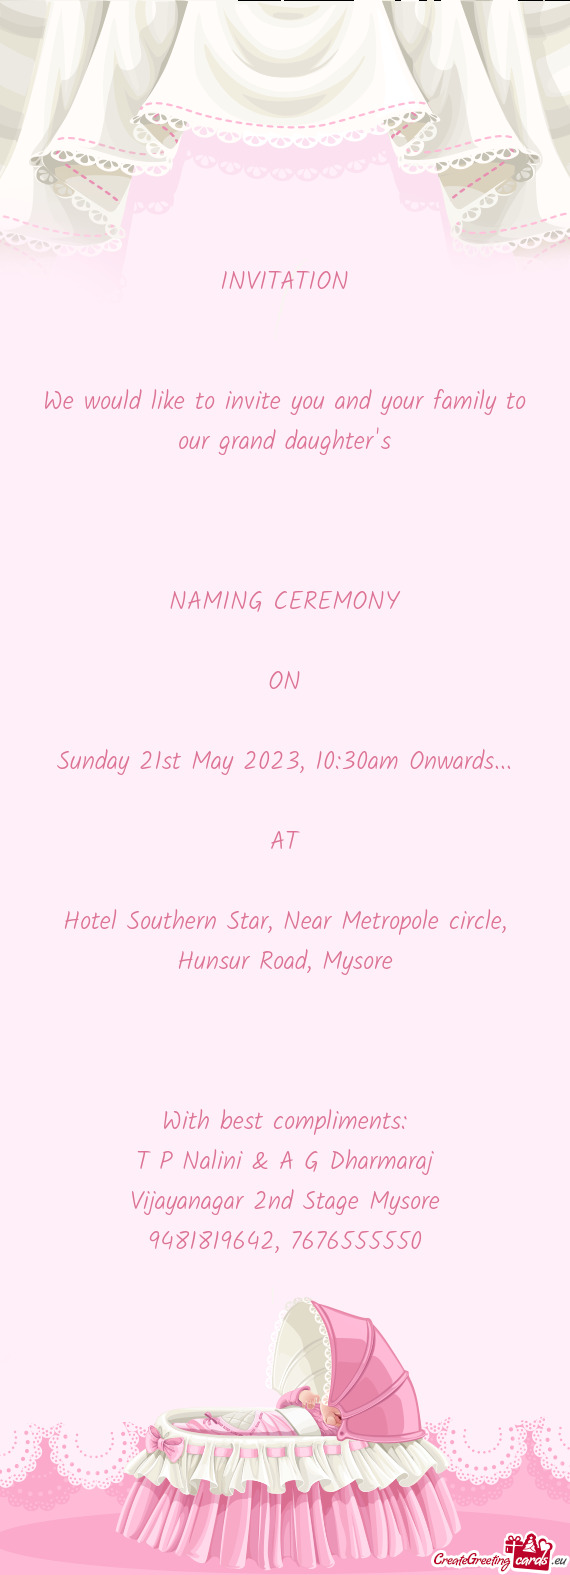 We would like to invite you and your family to our grand daughter